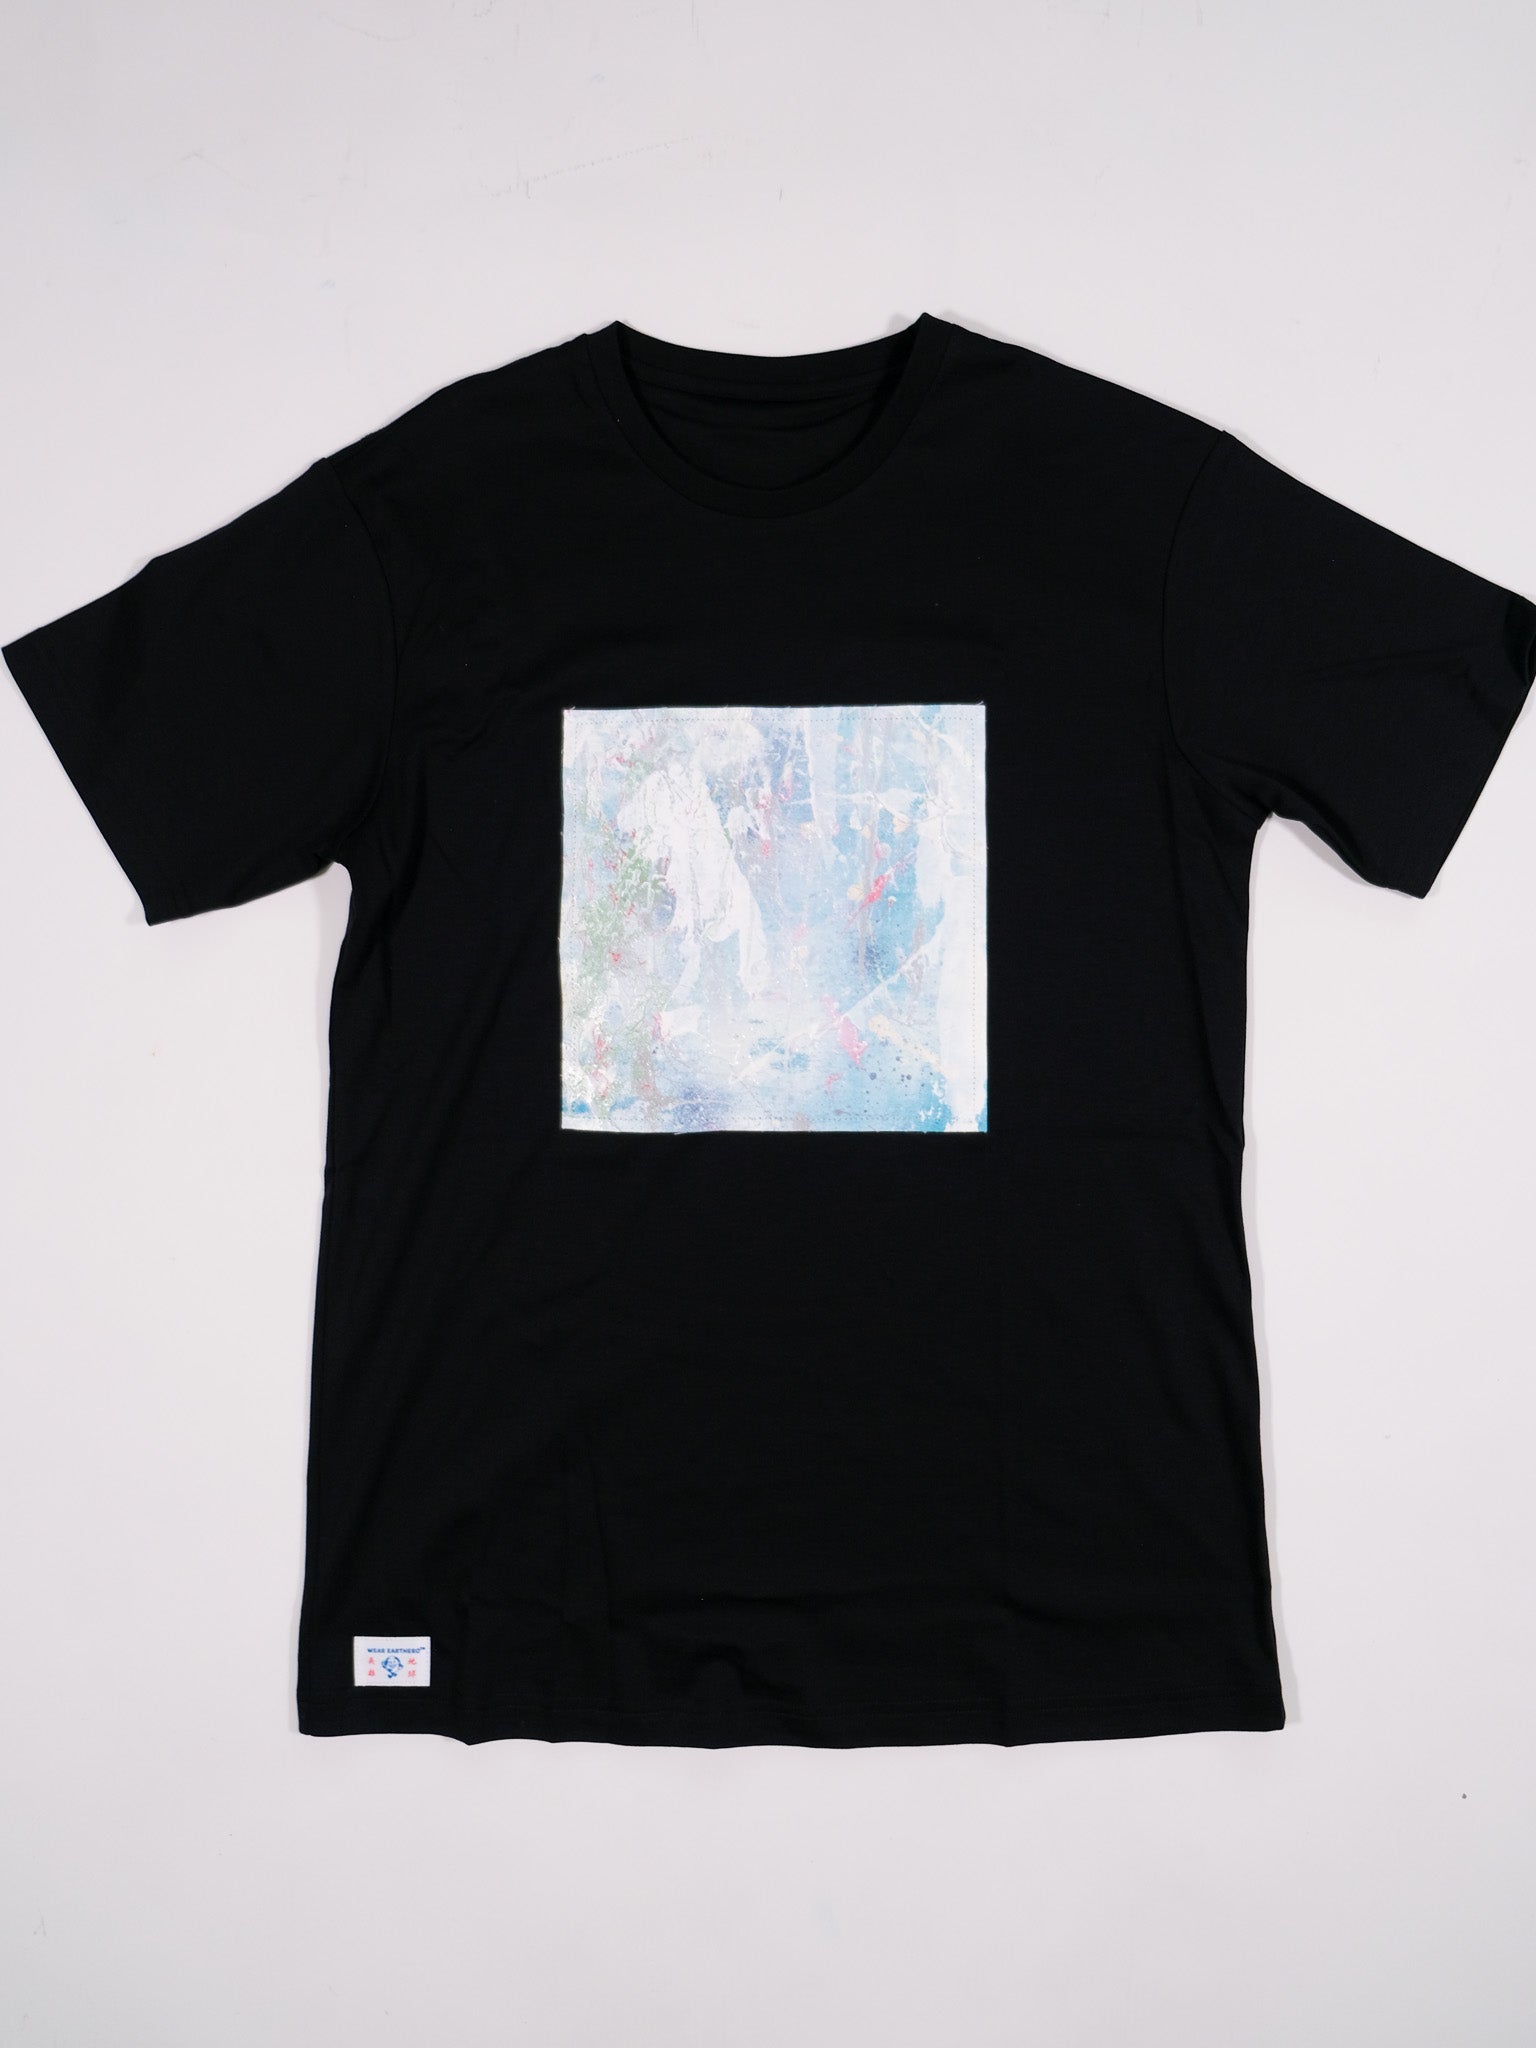 IRIS YUNG - Daydream Believer Art-isan Collective Patched T-Shirt No. 7 Large